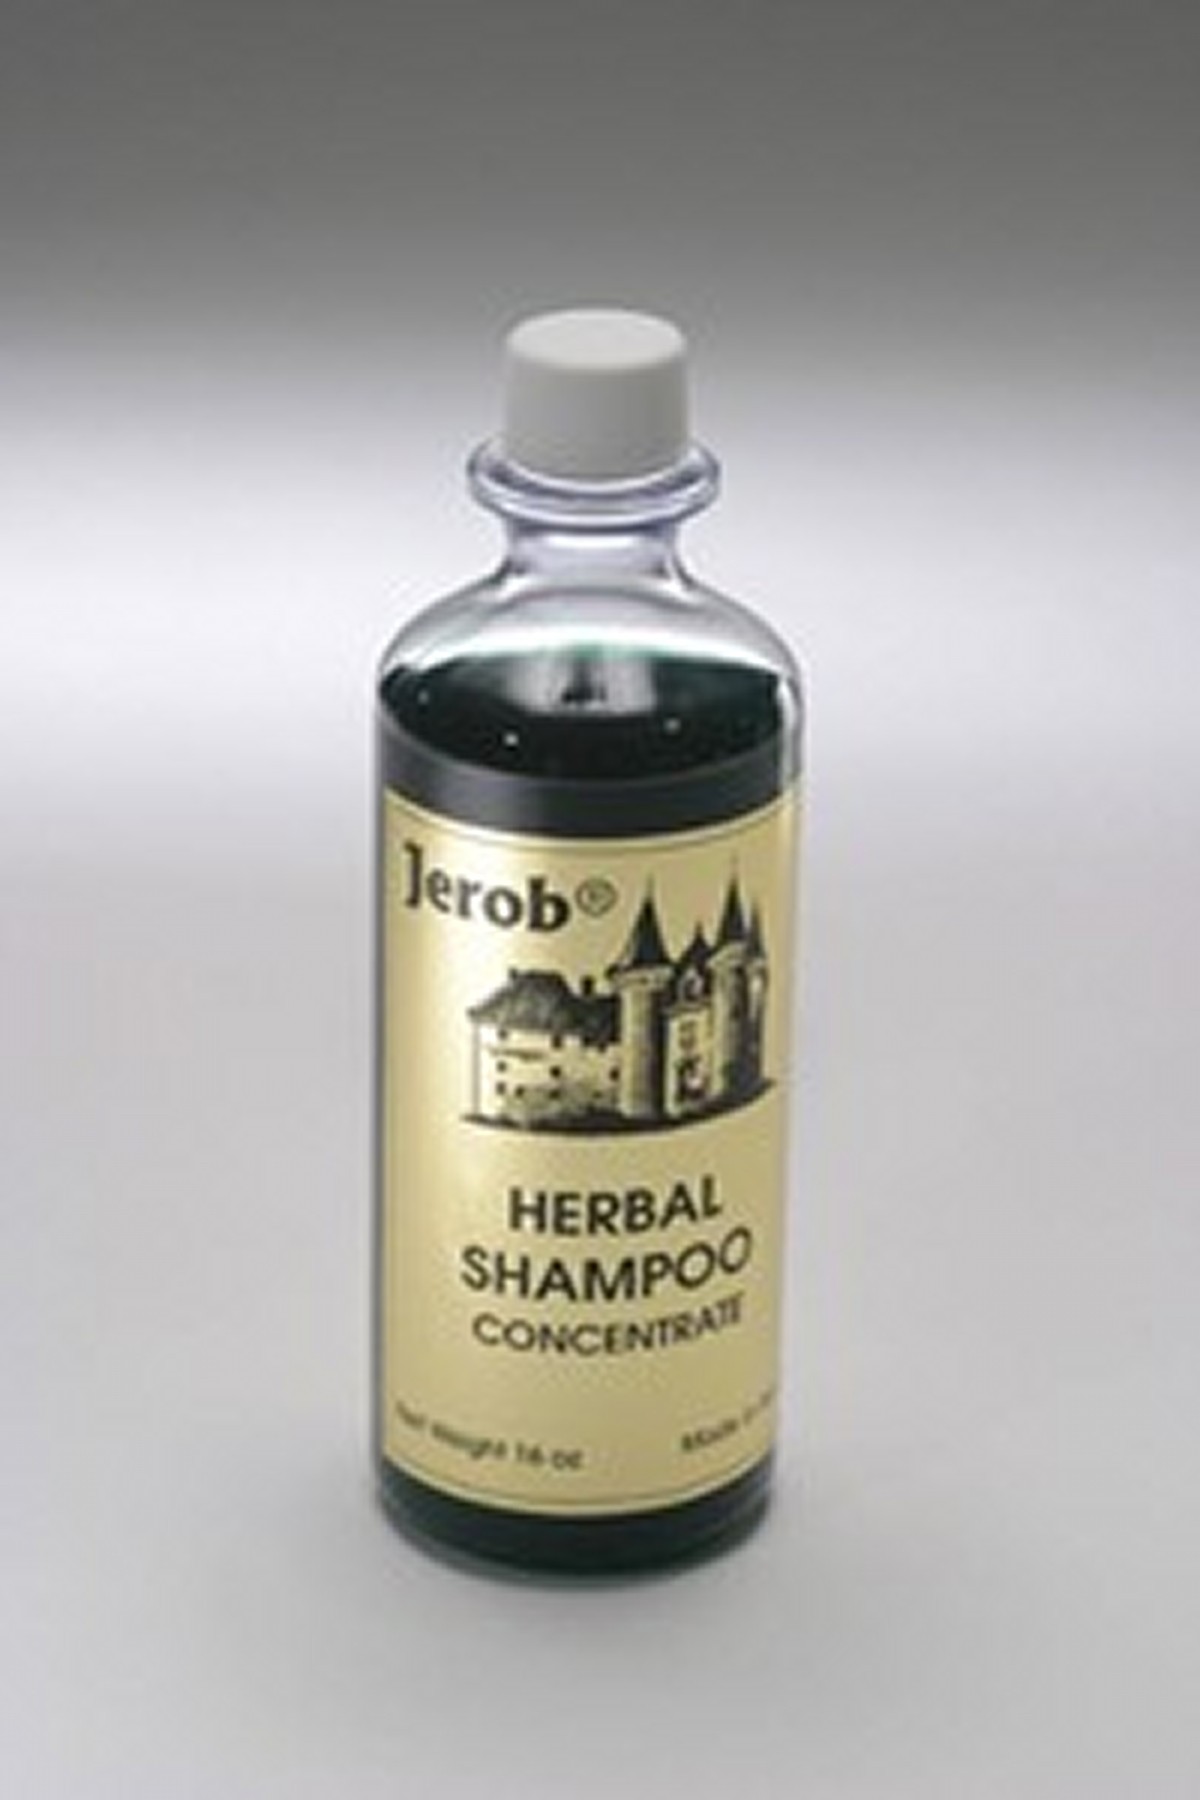 Jerob Shampoo Herbal Concentrate 473 ml